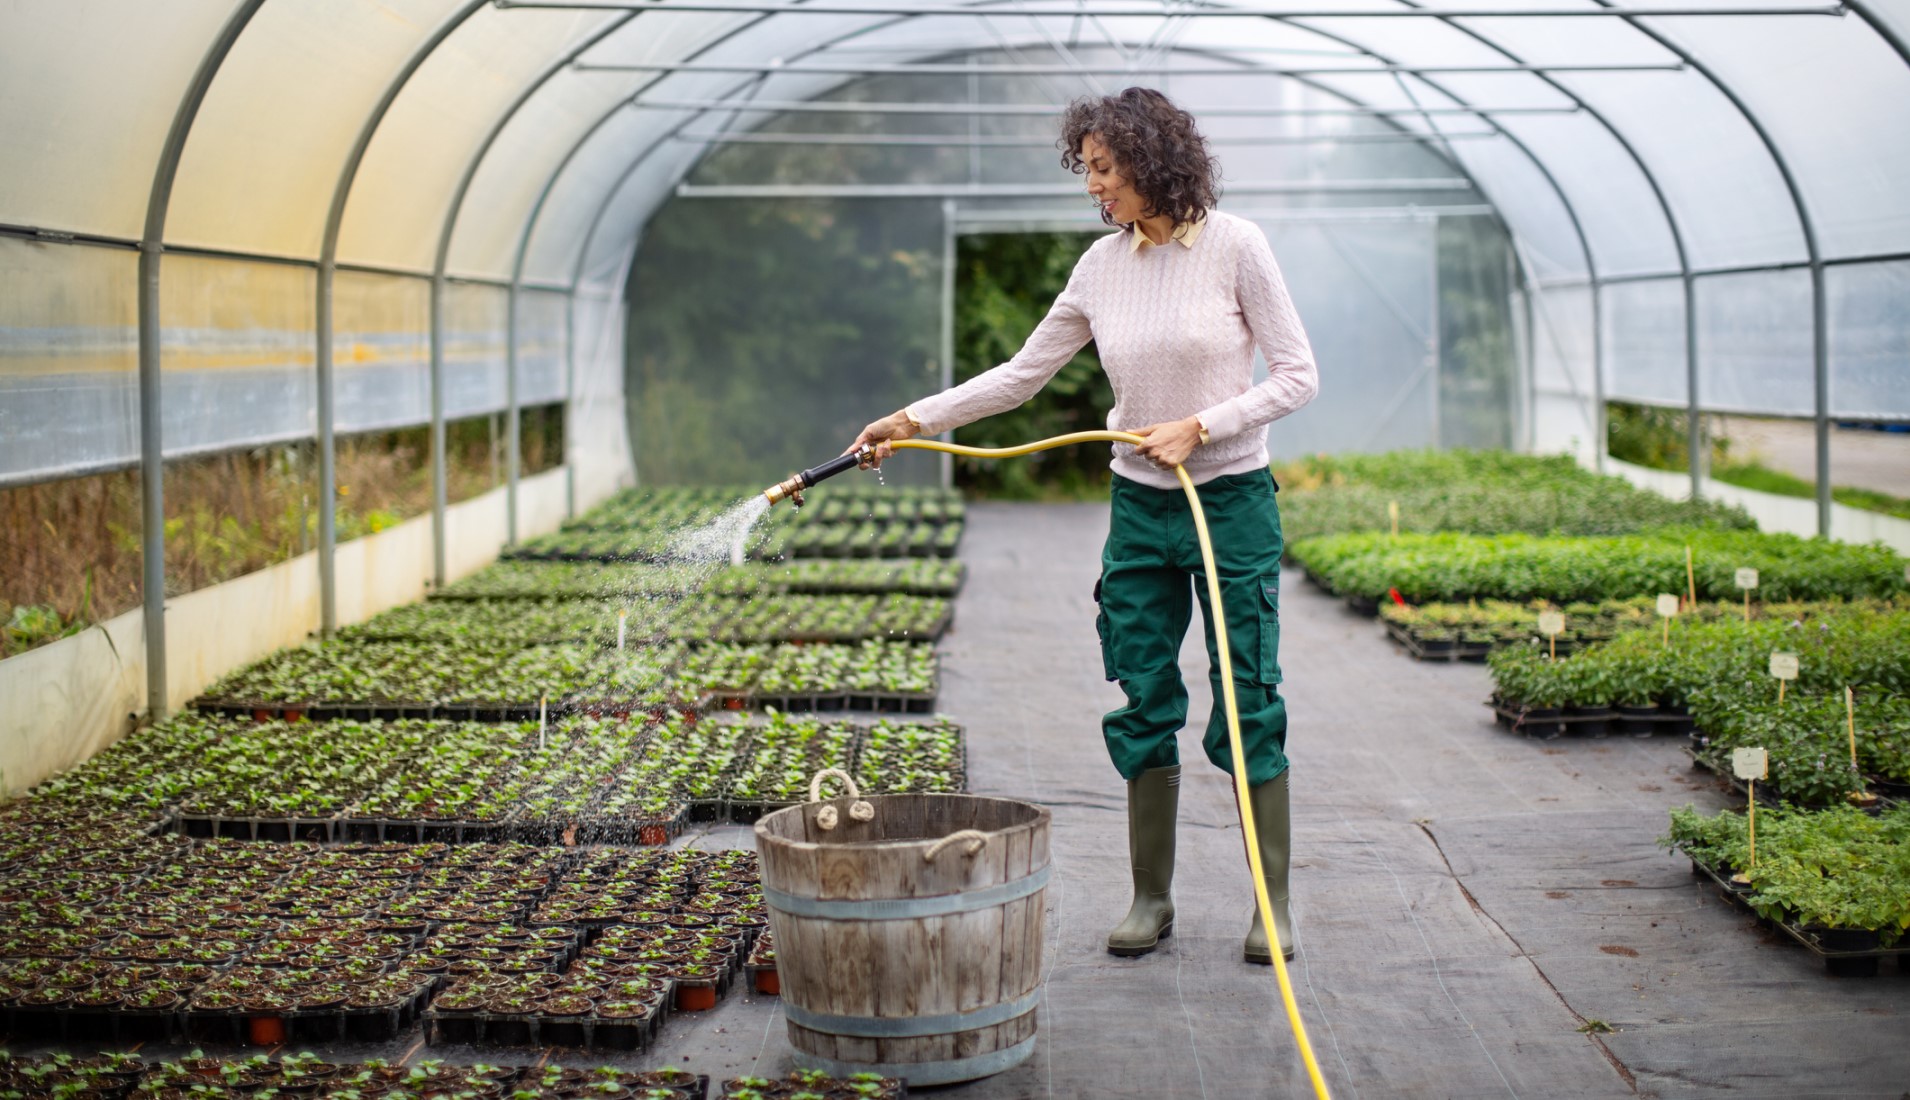 a woman with bipolar disorder at work watering plants in a greenhouse